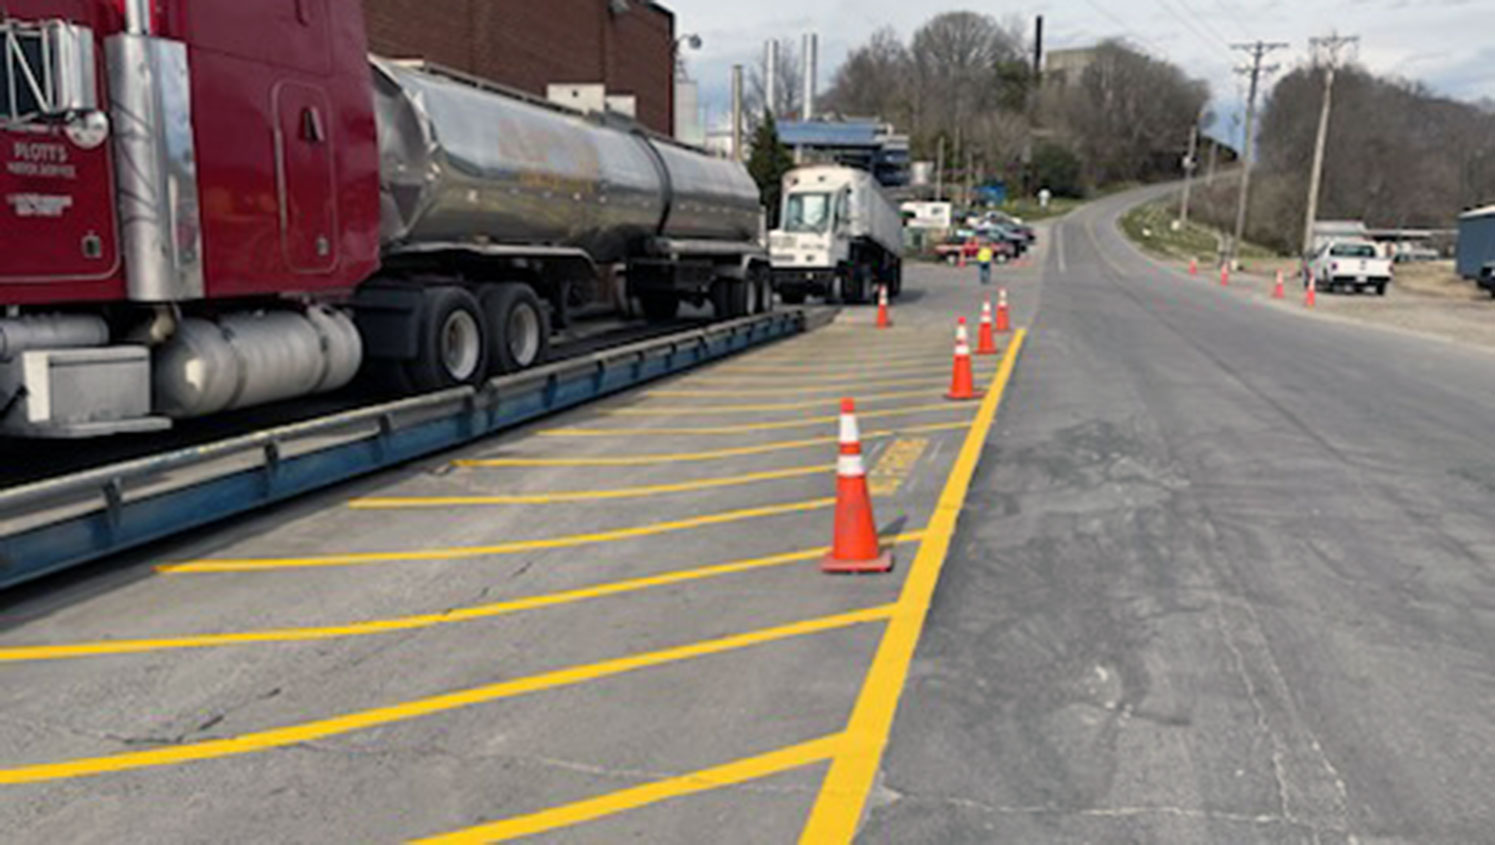 cones on top of re-striped safety lane markings